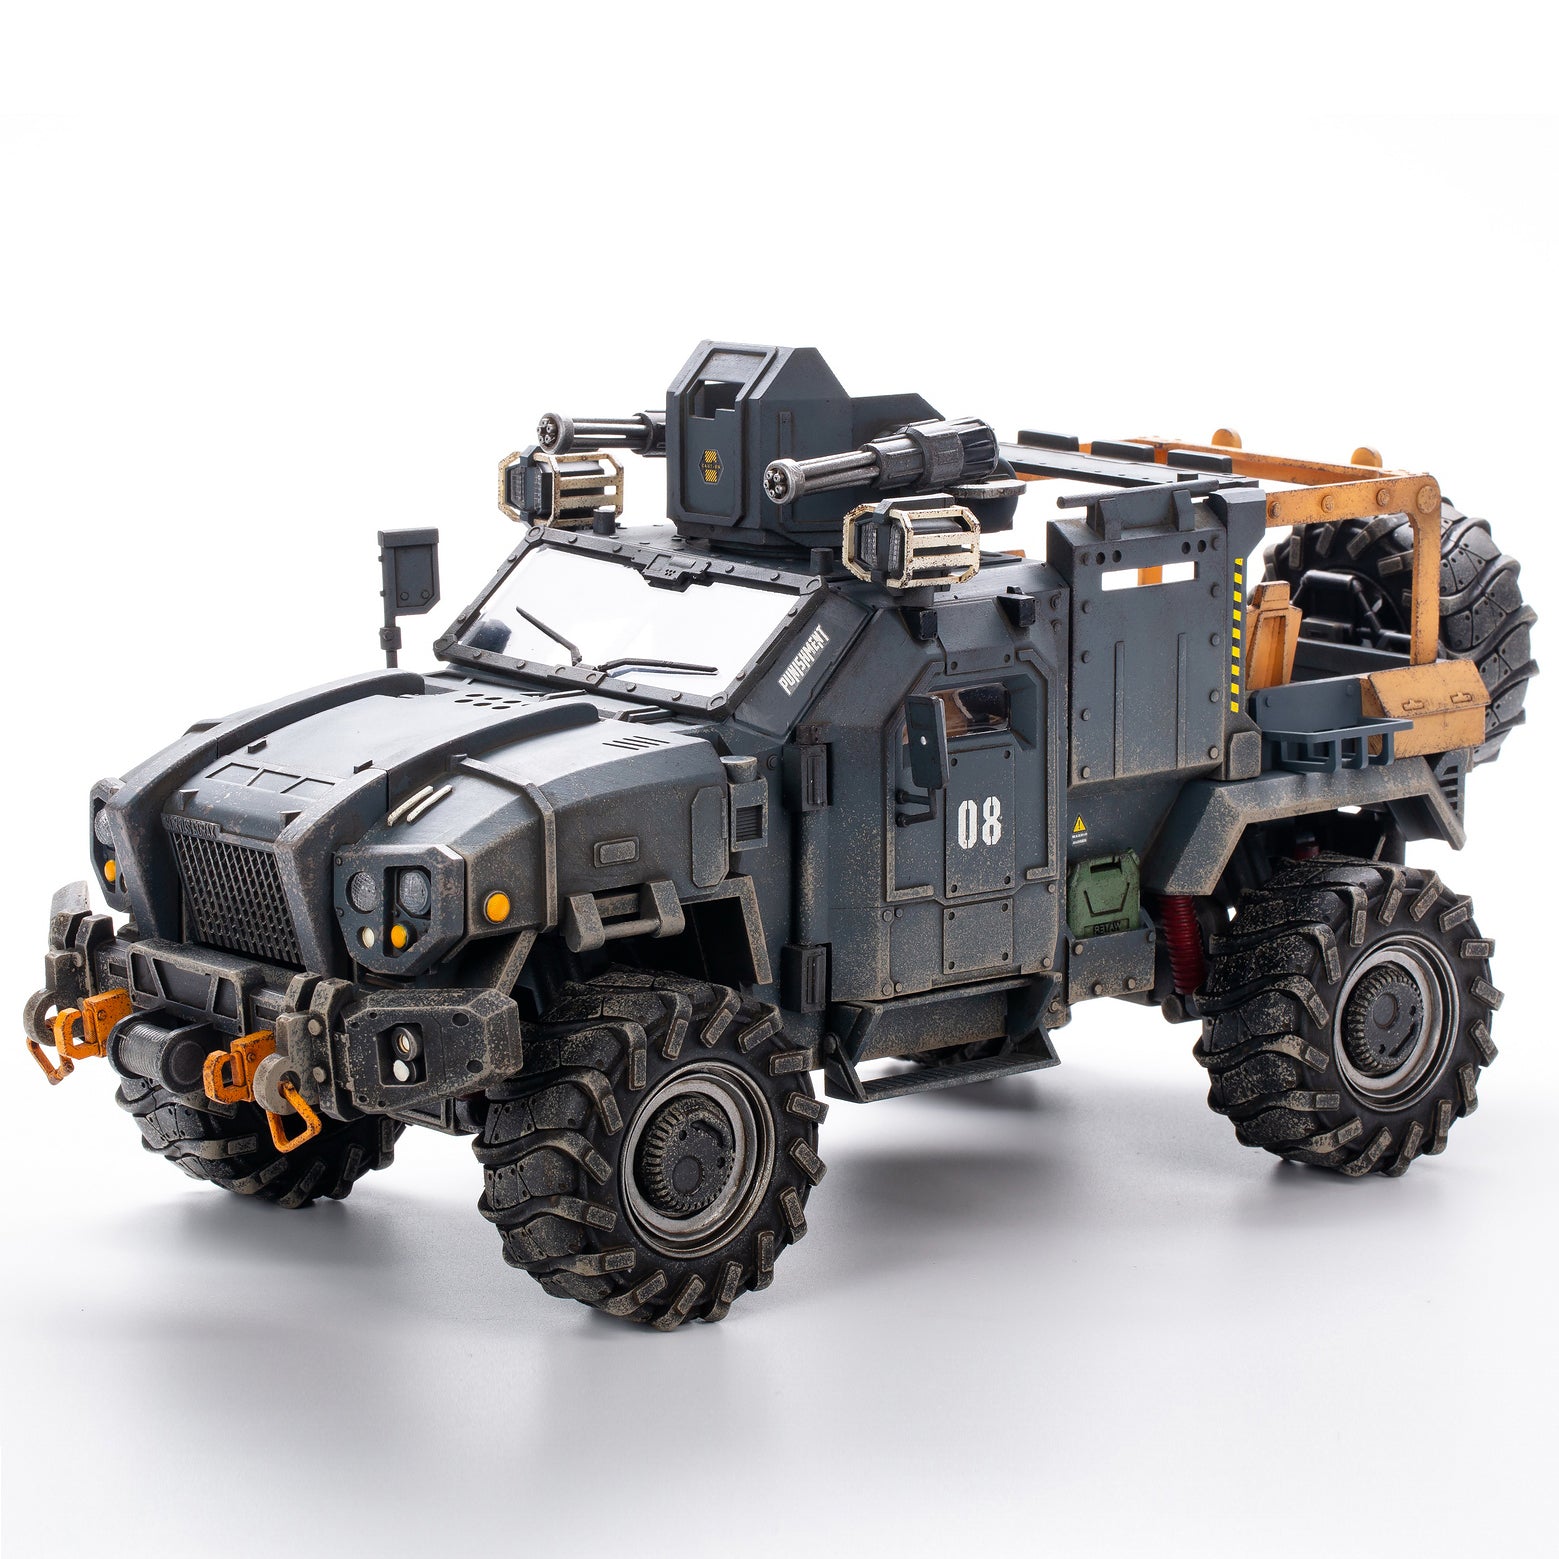 JoyToy 1/18 Scale Off-Road Vehicle Model Car Toy Matching 4 inches Action Figures FM 1411 Default Title Official Joytoy Online Merch